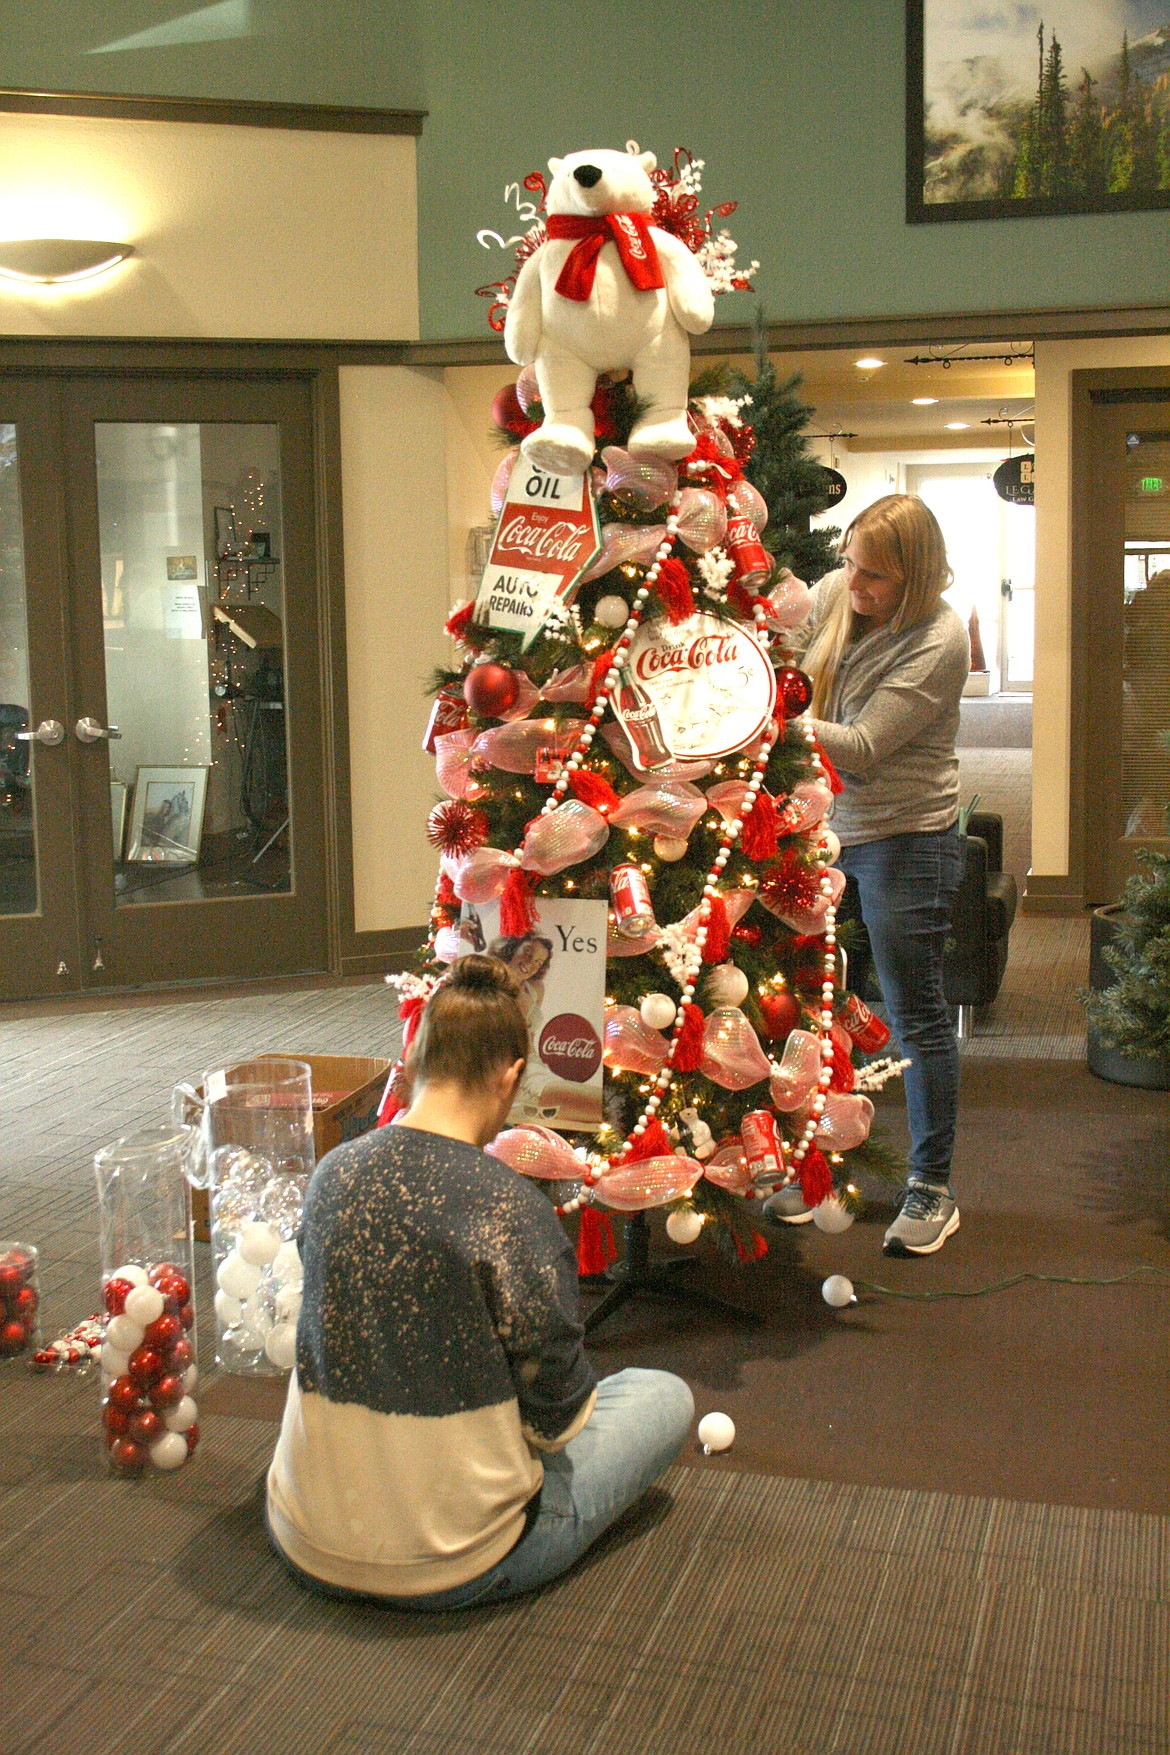 Kayla Hoffer (seated) and Anna Lucero (standing) decorate the Fathom Realty entry on Black Friday for the Habitat for Humanity of Greater Moses Lake’s Festival of Trees, which are on display at the Smith Martin Building, 102 E. Third Ave., Moses Lake.